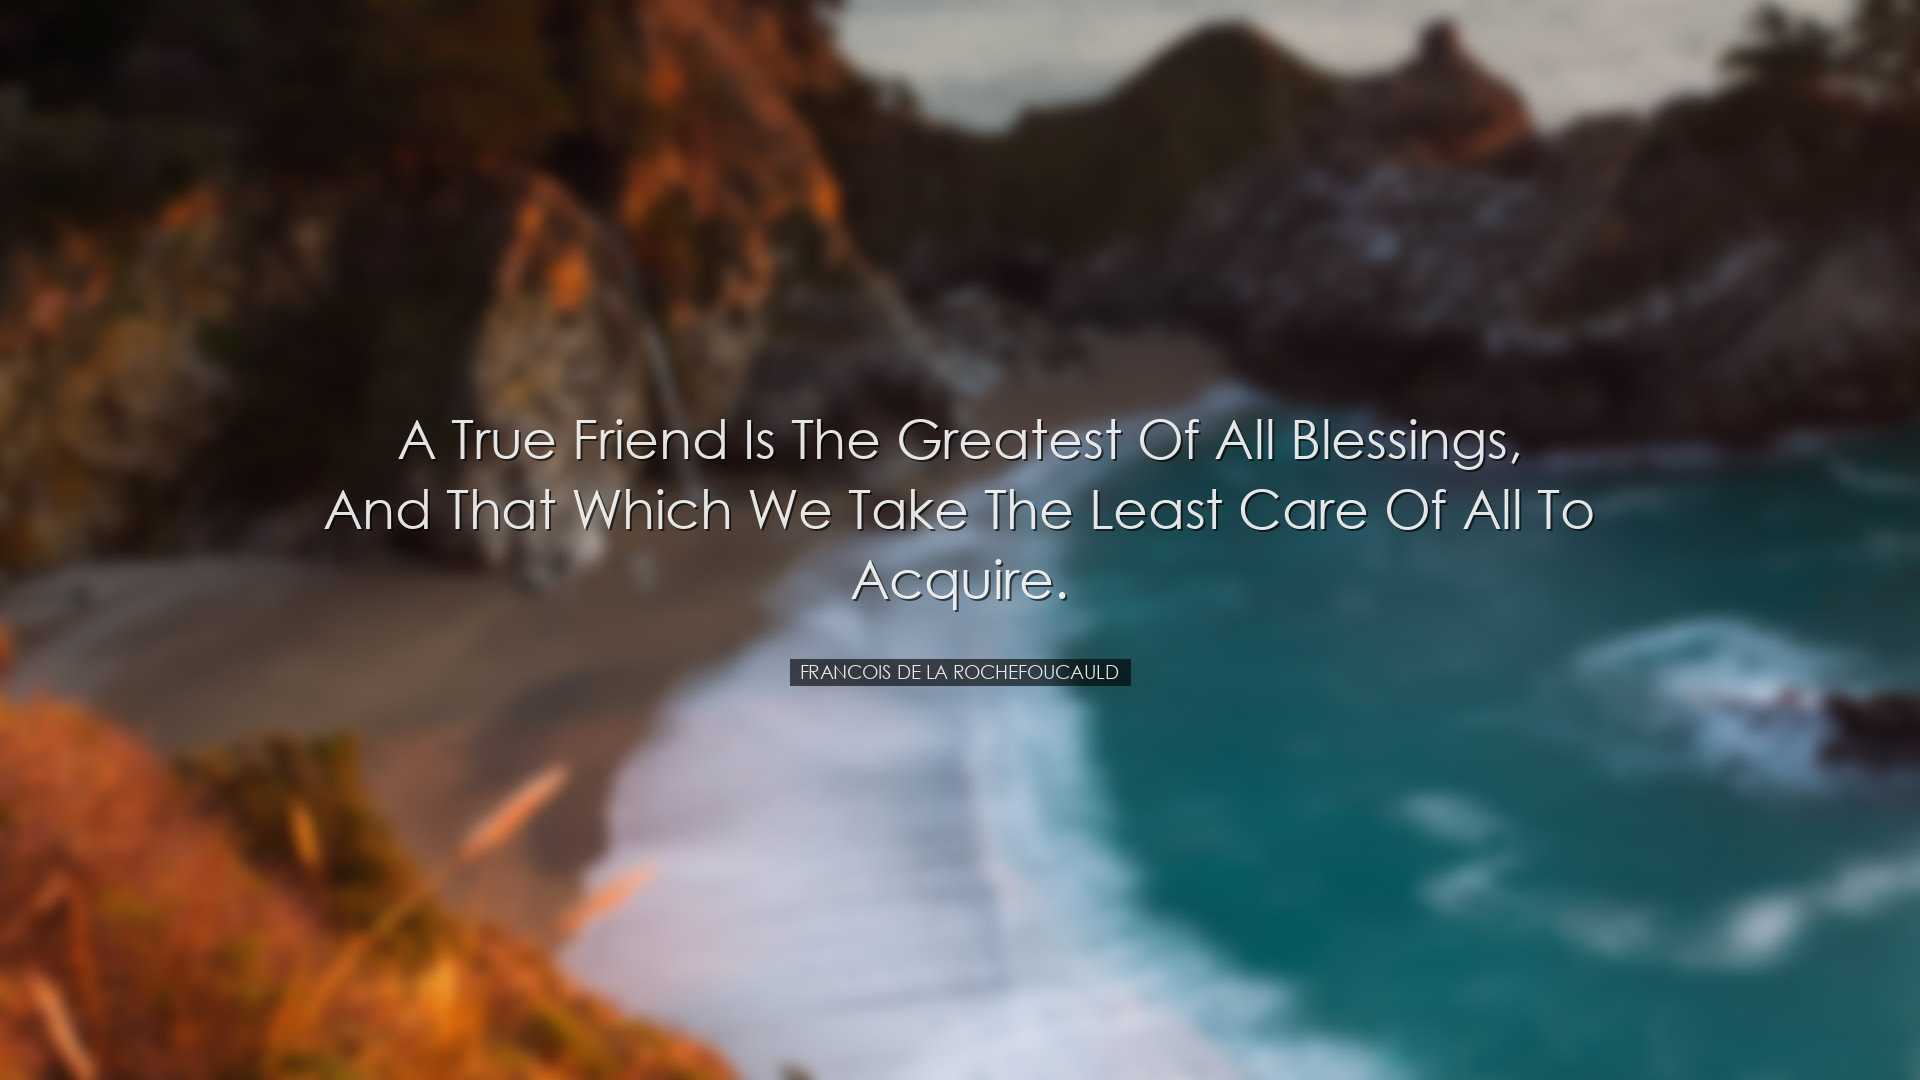 A true friend is the greatest of all blessings, and that which we